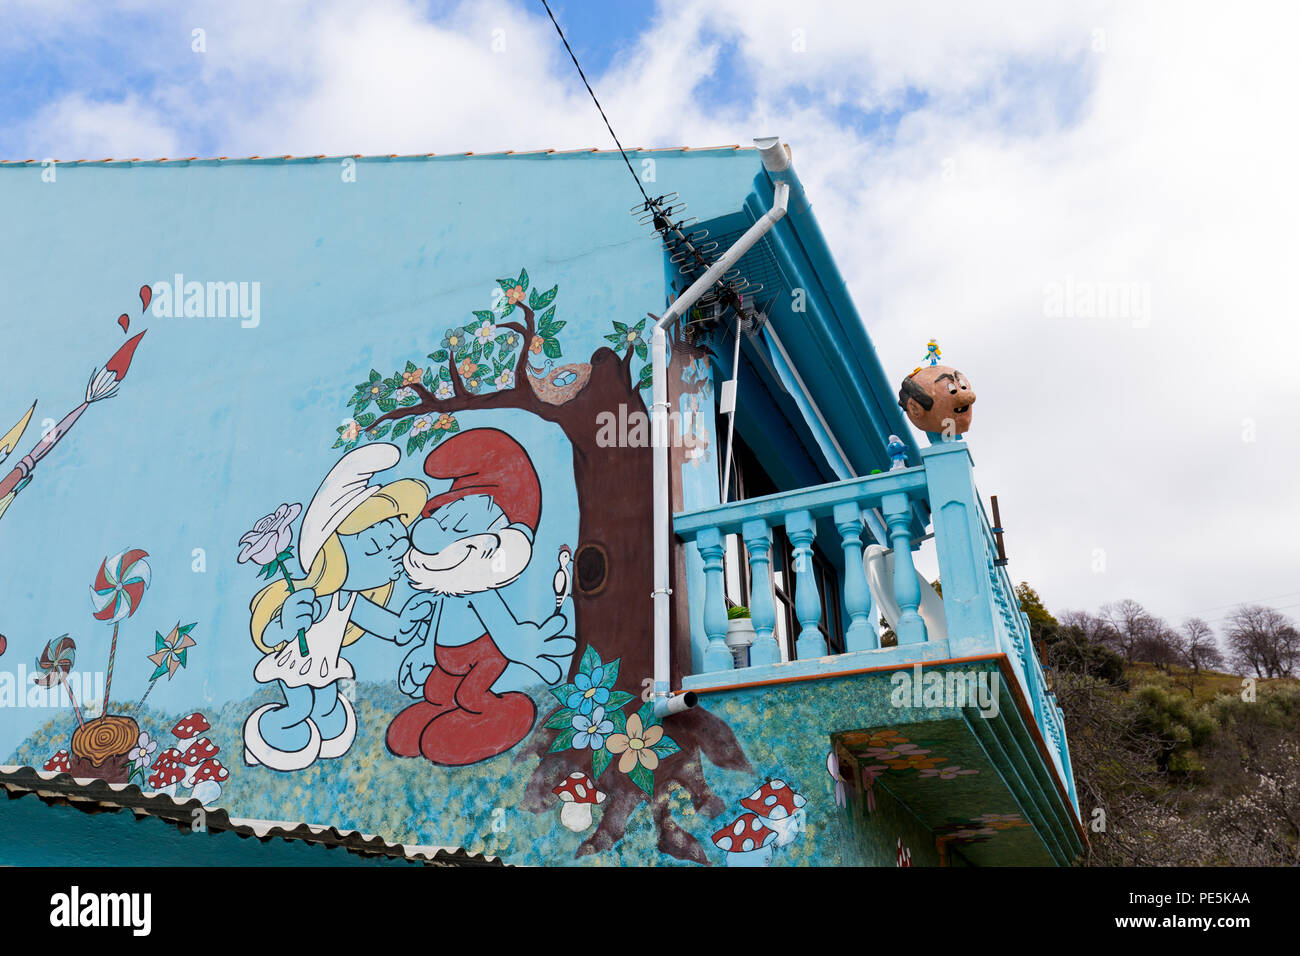 Juzcar buildings in the village (including the church) were painted smurf-blue by Sony España to celebrate the premiere of the Smurfs movie. Stock Photo